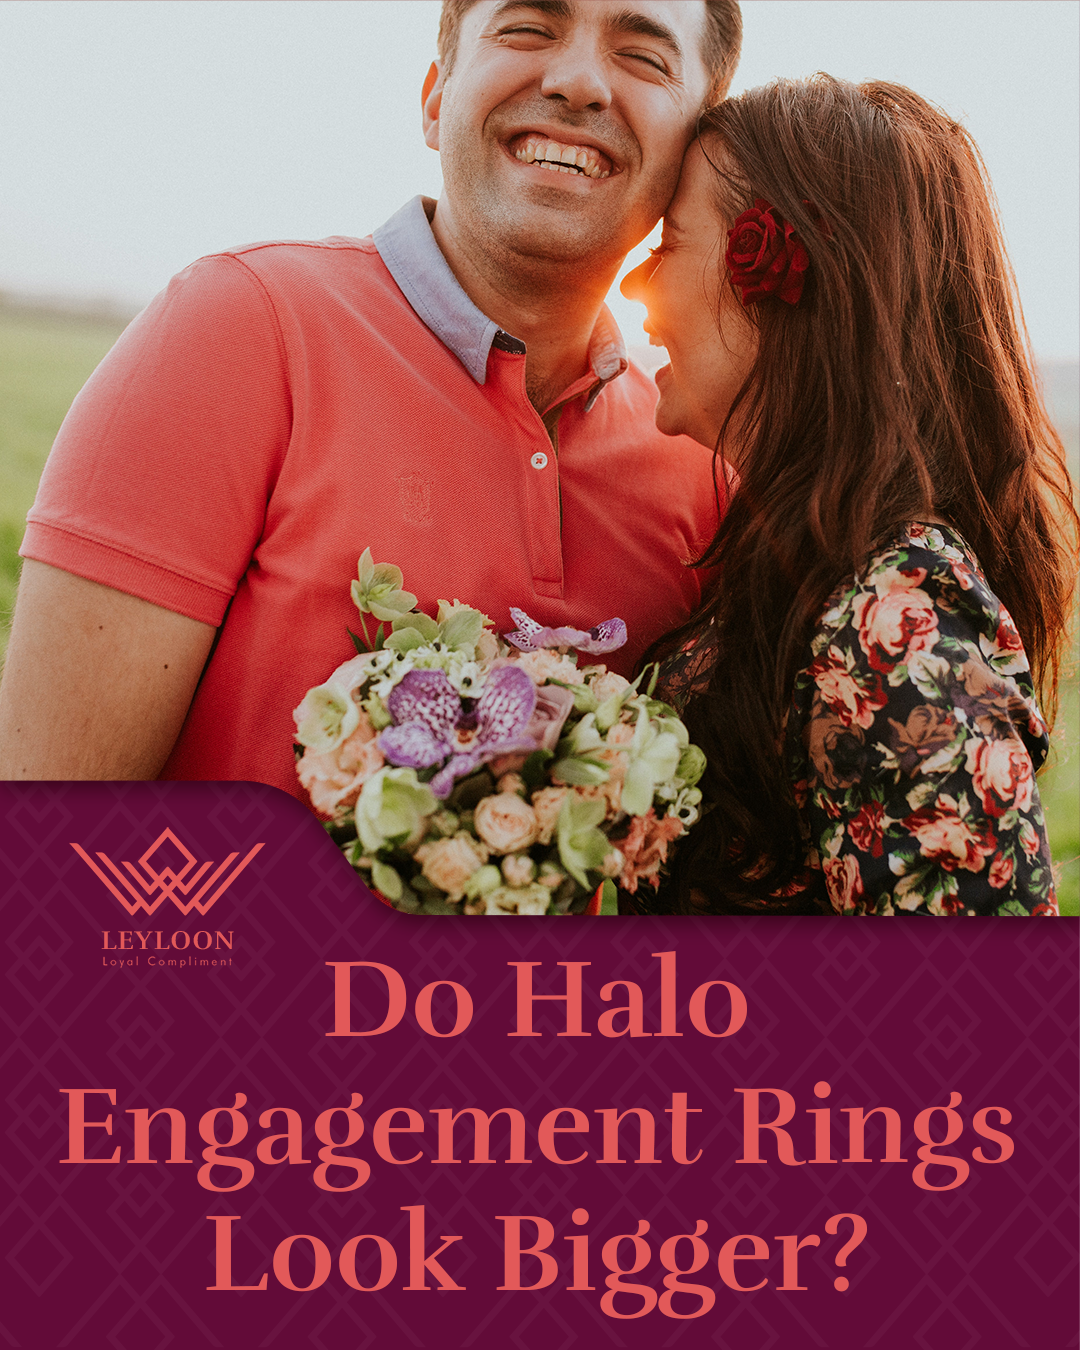 Do Halo Engagement Rings Look Bigger?